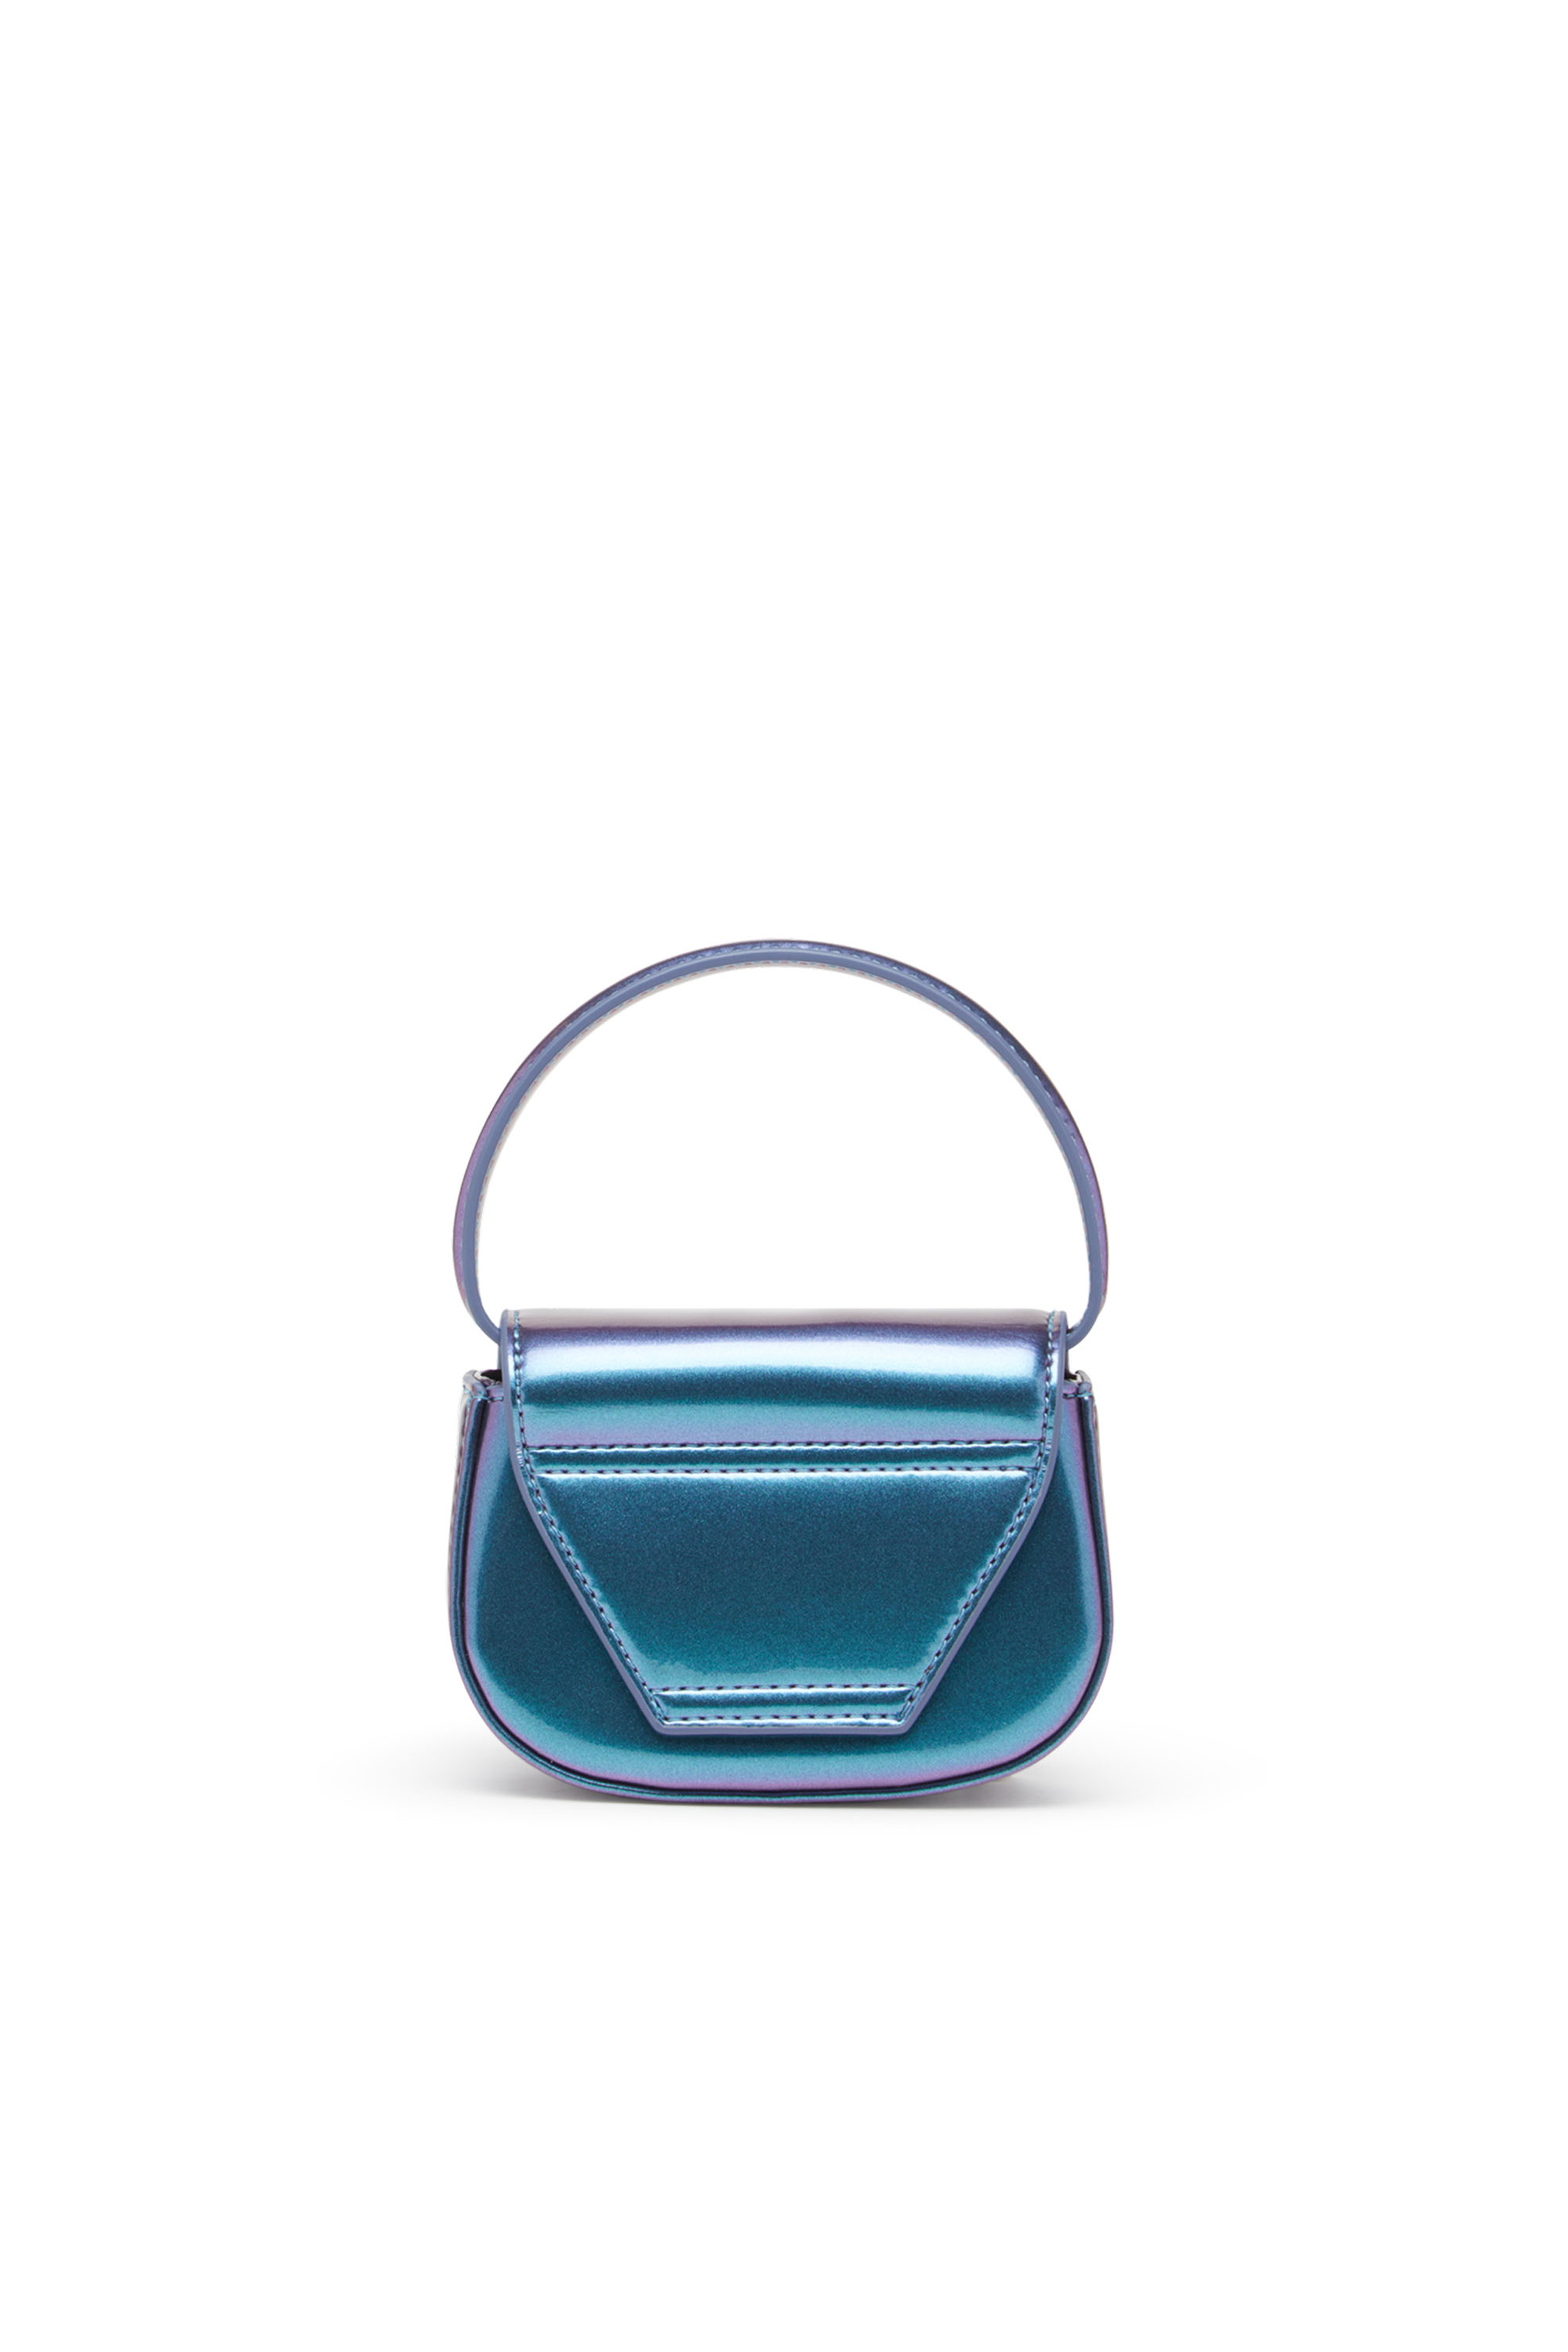 Diesel - 1DR XS, Donna 1DR XS-Iconica mini bag iridescente in Blu - Image 2